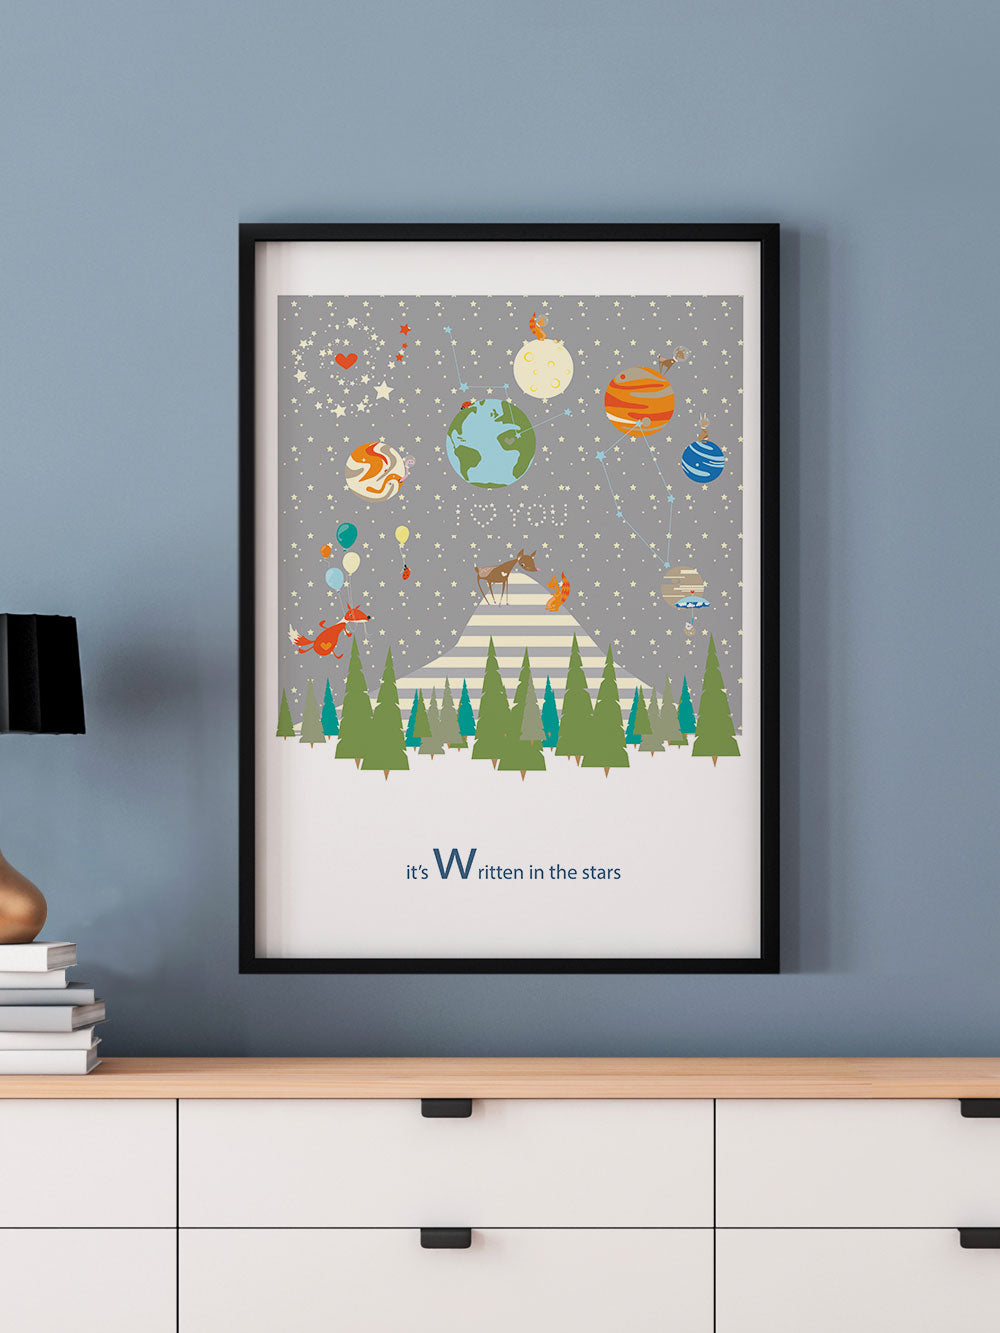 Written in the Stars Woodland Print in a frame on a wall